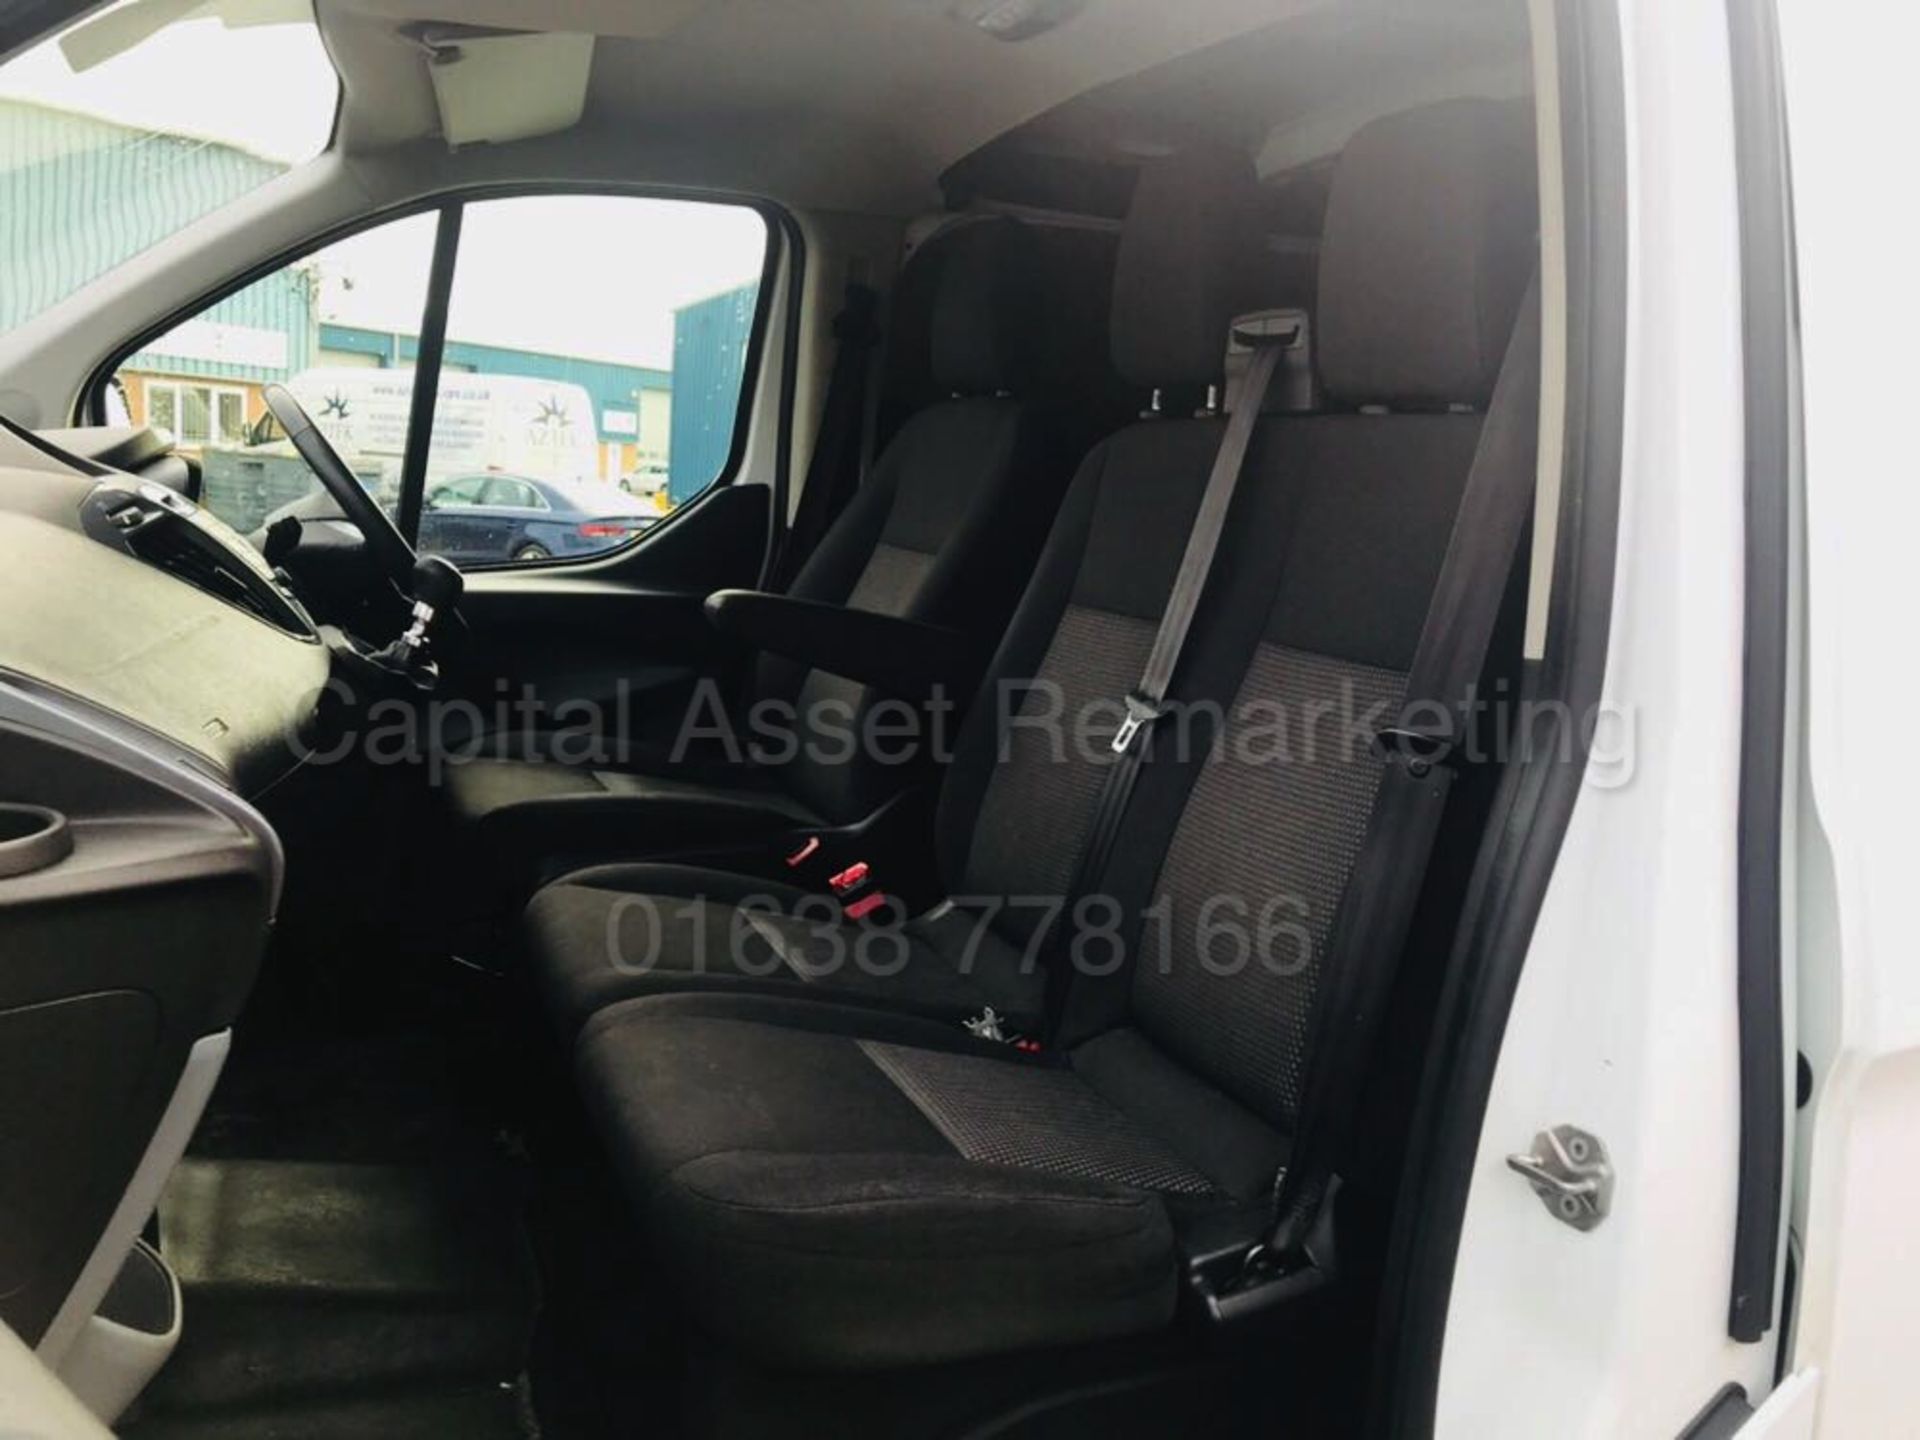 (On Sale) FORD TRANSIT CUSTOM 'LIMITED SPEC' (2013 - NEW MODEL) '2.2 TDCI - 6 SPEED' *A/C* (NO VAT) - Image 13 of 32